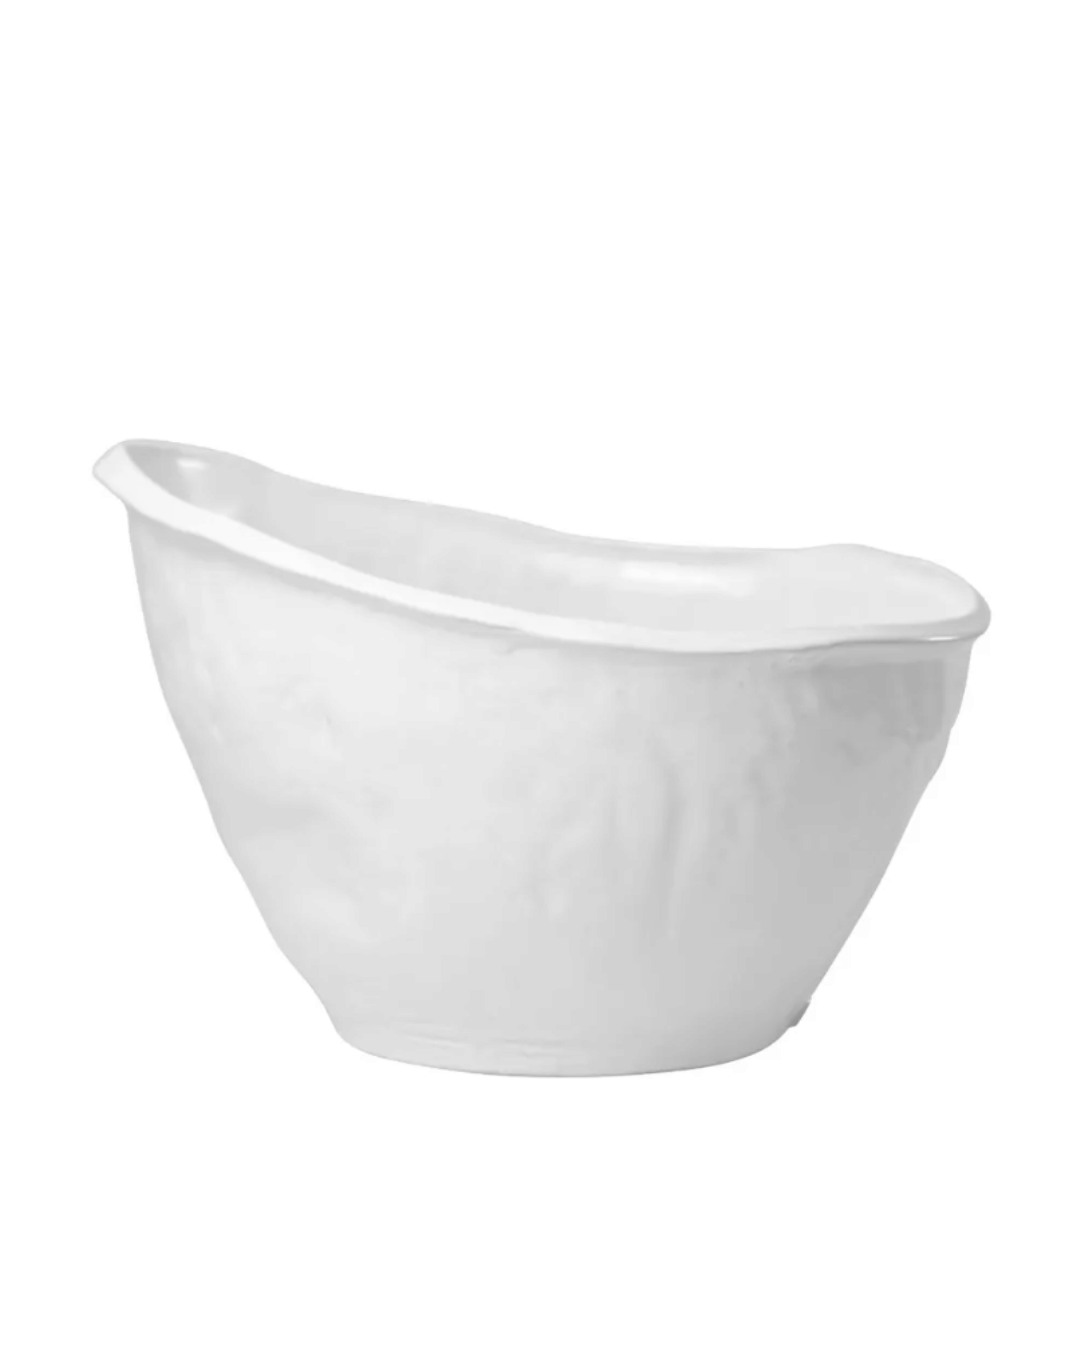 A white, freestanding Ice Bucket No. 775 by Montes Doggett with a modern design on a plain white background, suitable for elegant Scottsdale, Arizona bungalows. The tub features a smooth, curved edge for comfort.